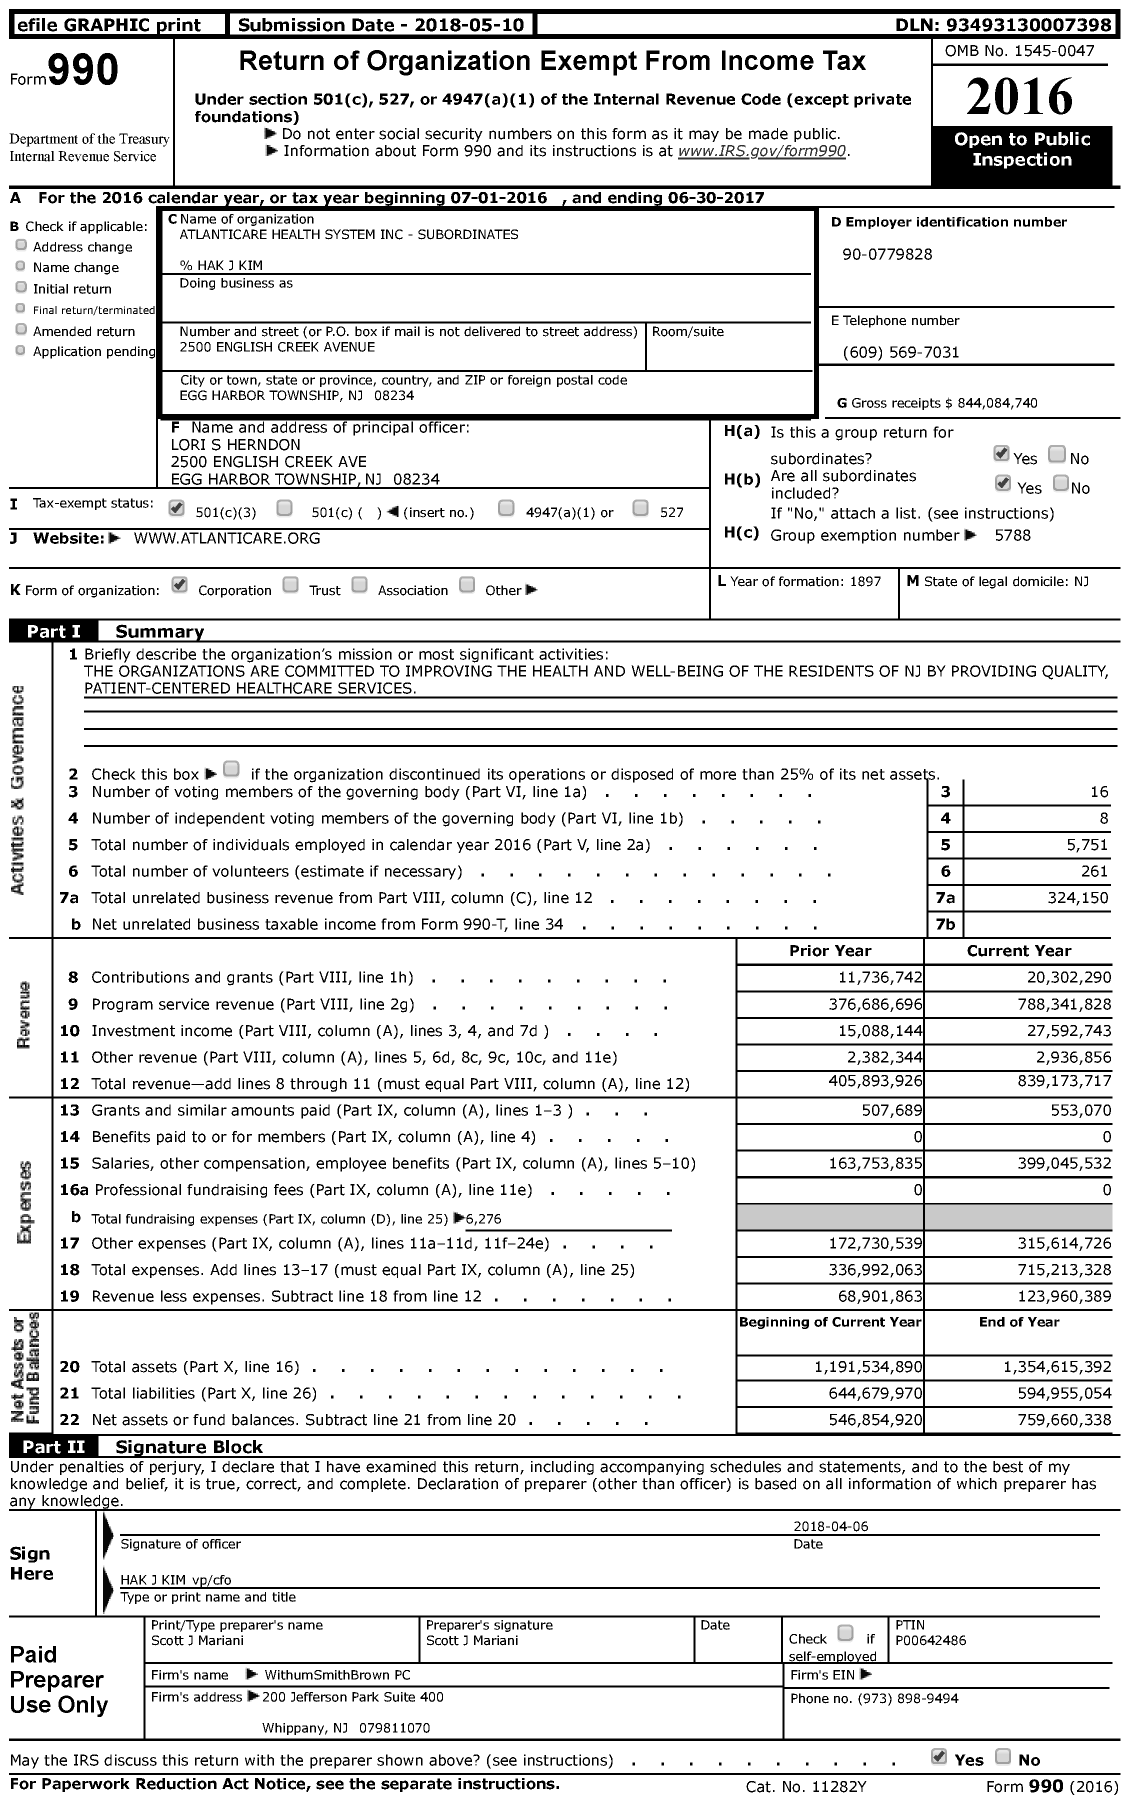 Image of first page of 2016 Form 990 for Atlanticare Health System - Subordinates / Group Return